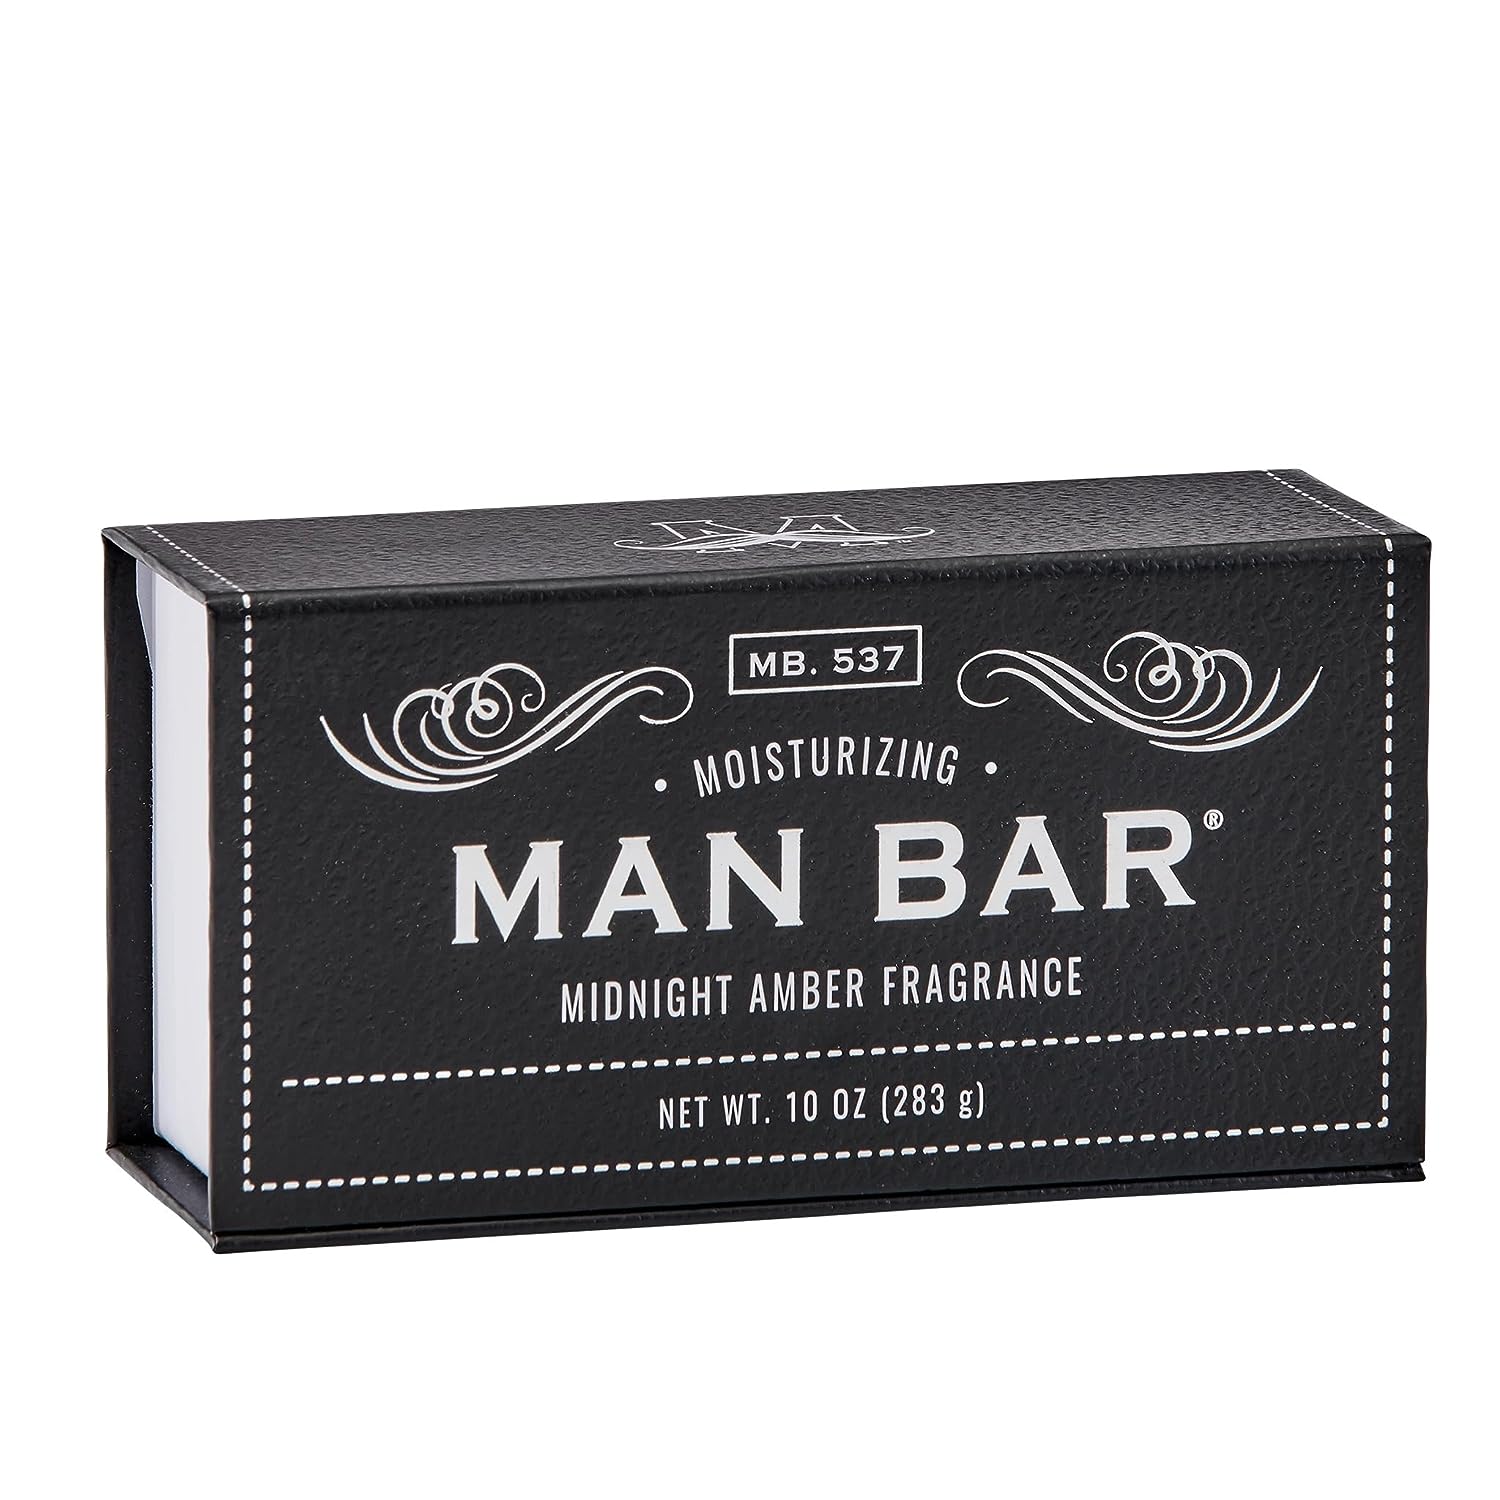 San Francisco Soap Company Midnight Amber Fragrance Man Bar - Moisturizing - No Harmful Chemicals - Good for All Skin Types - Made in the USA